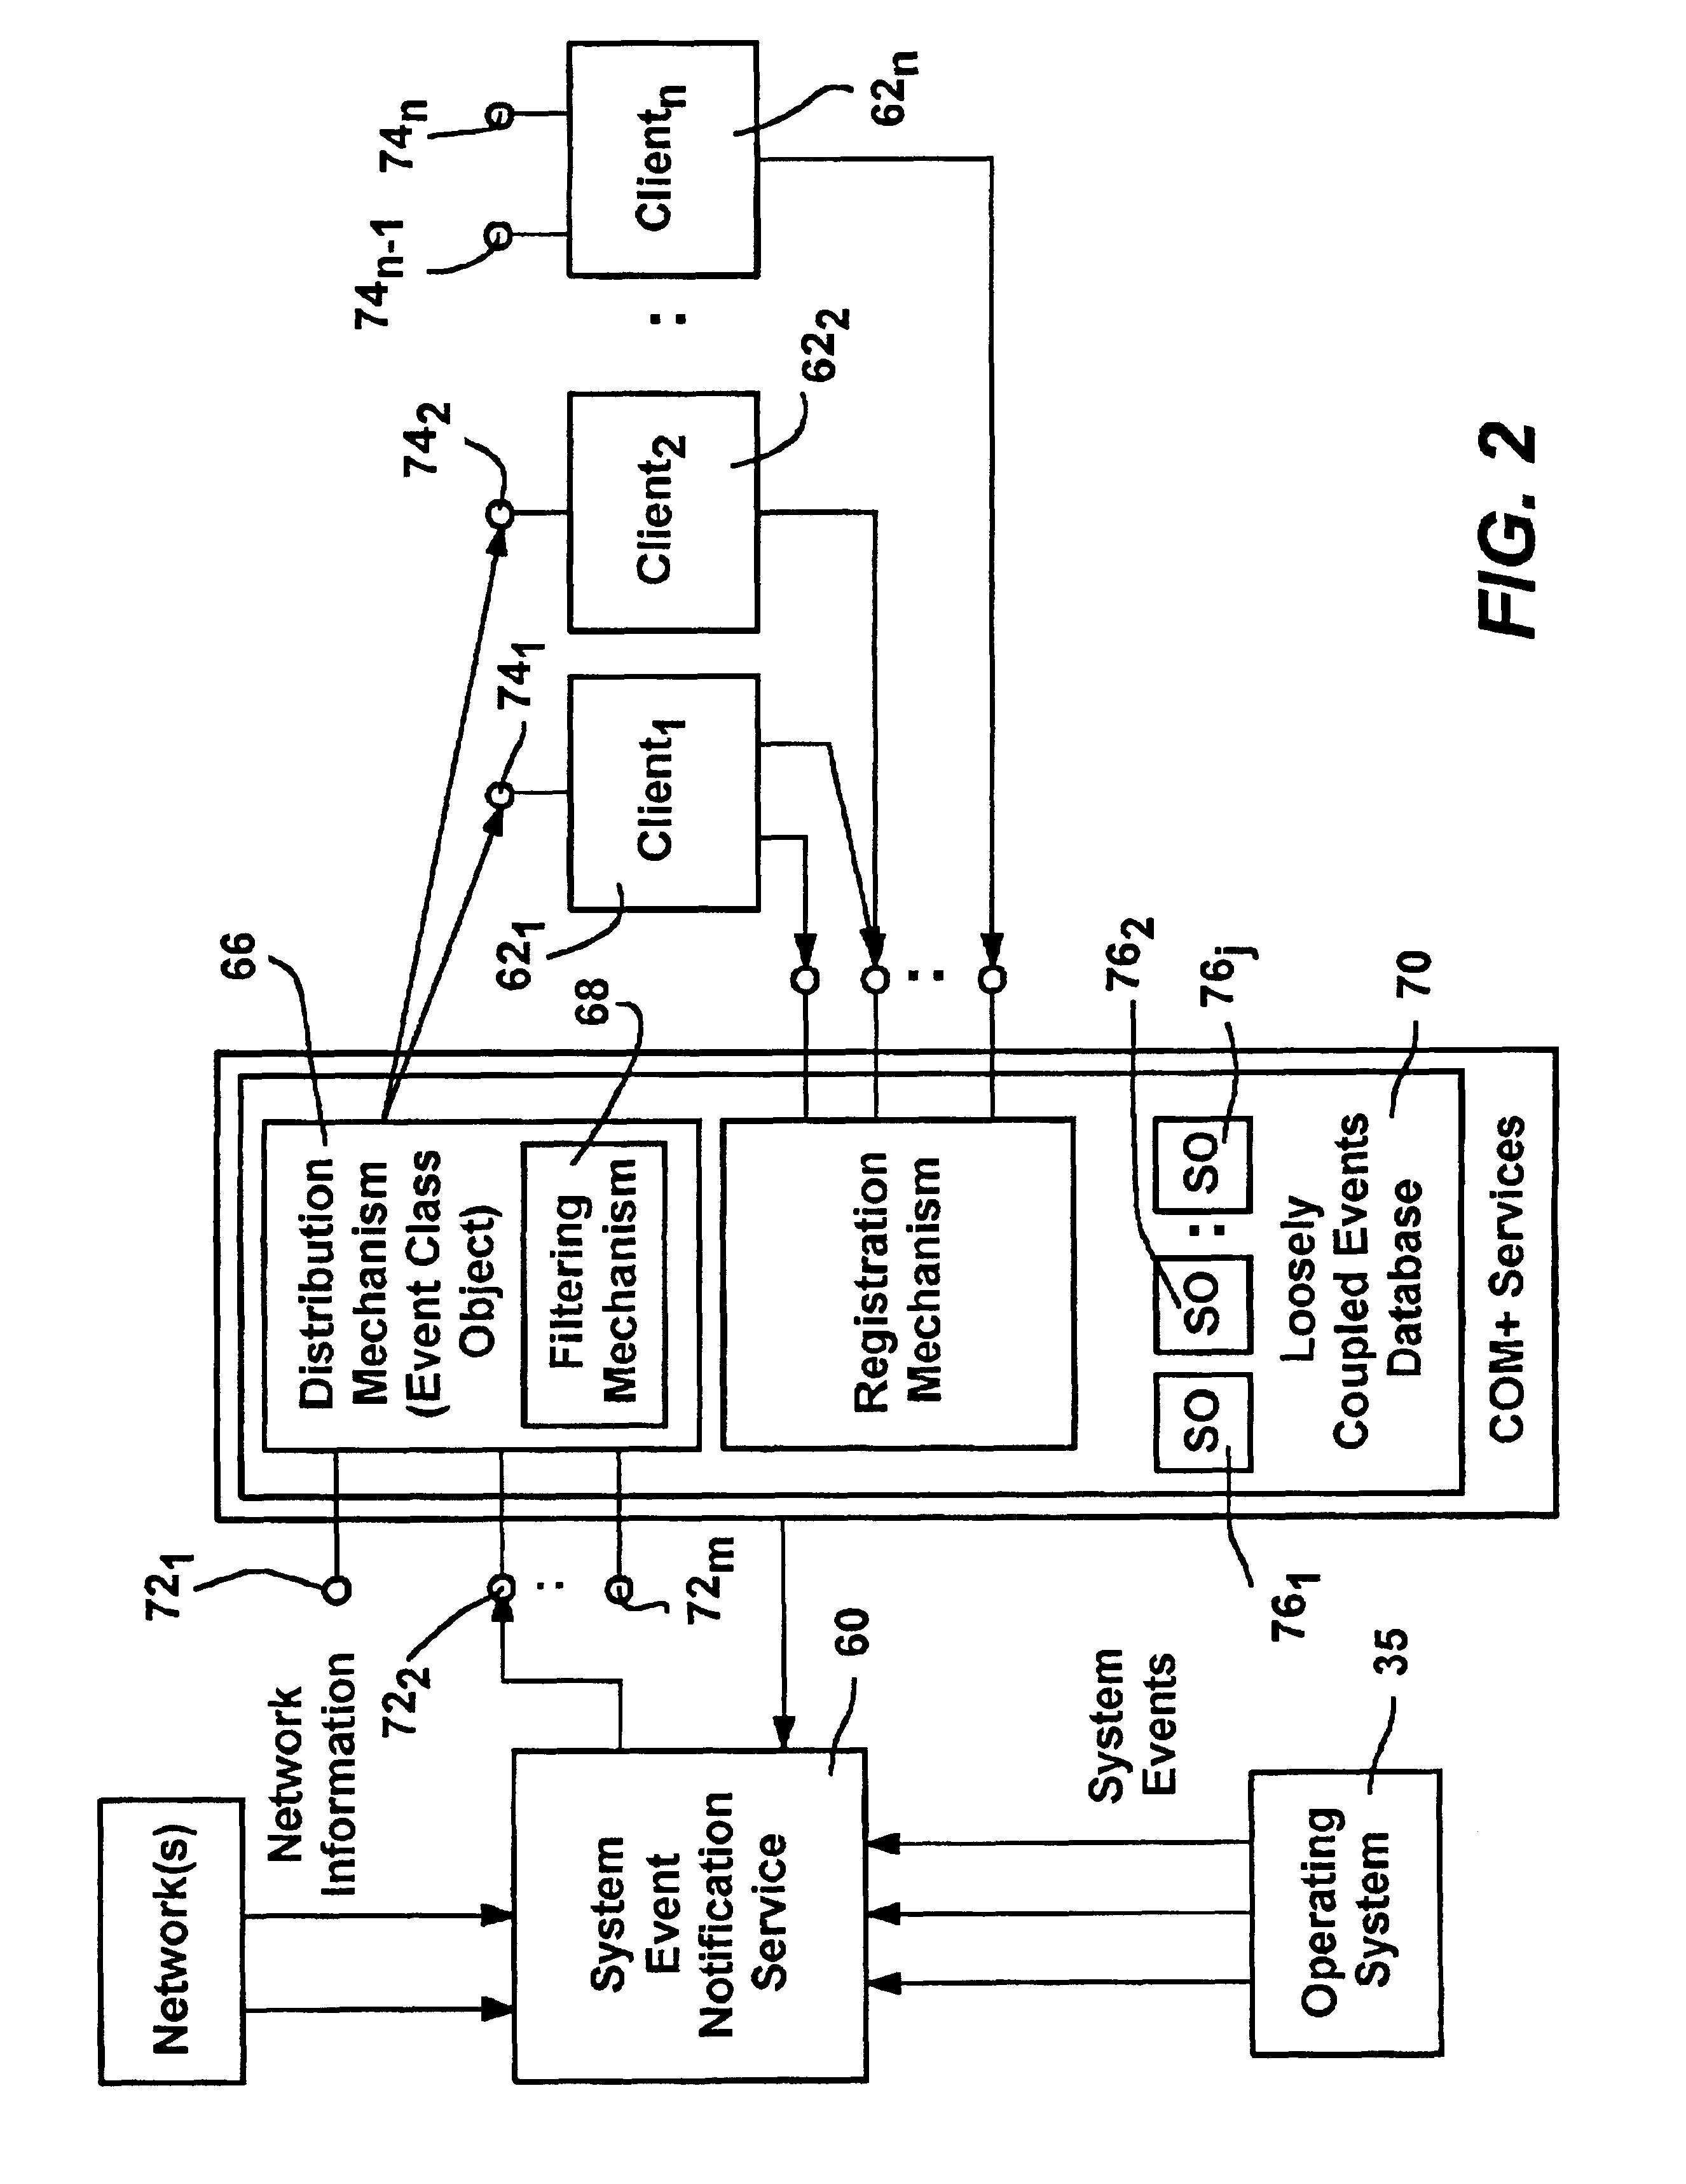 Method and mechanism for providing computer programs with computer system events